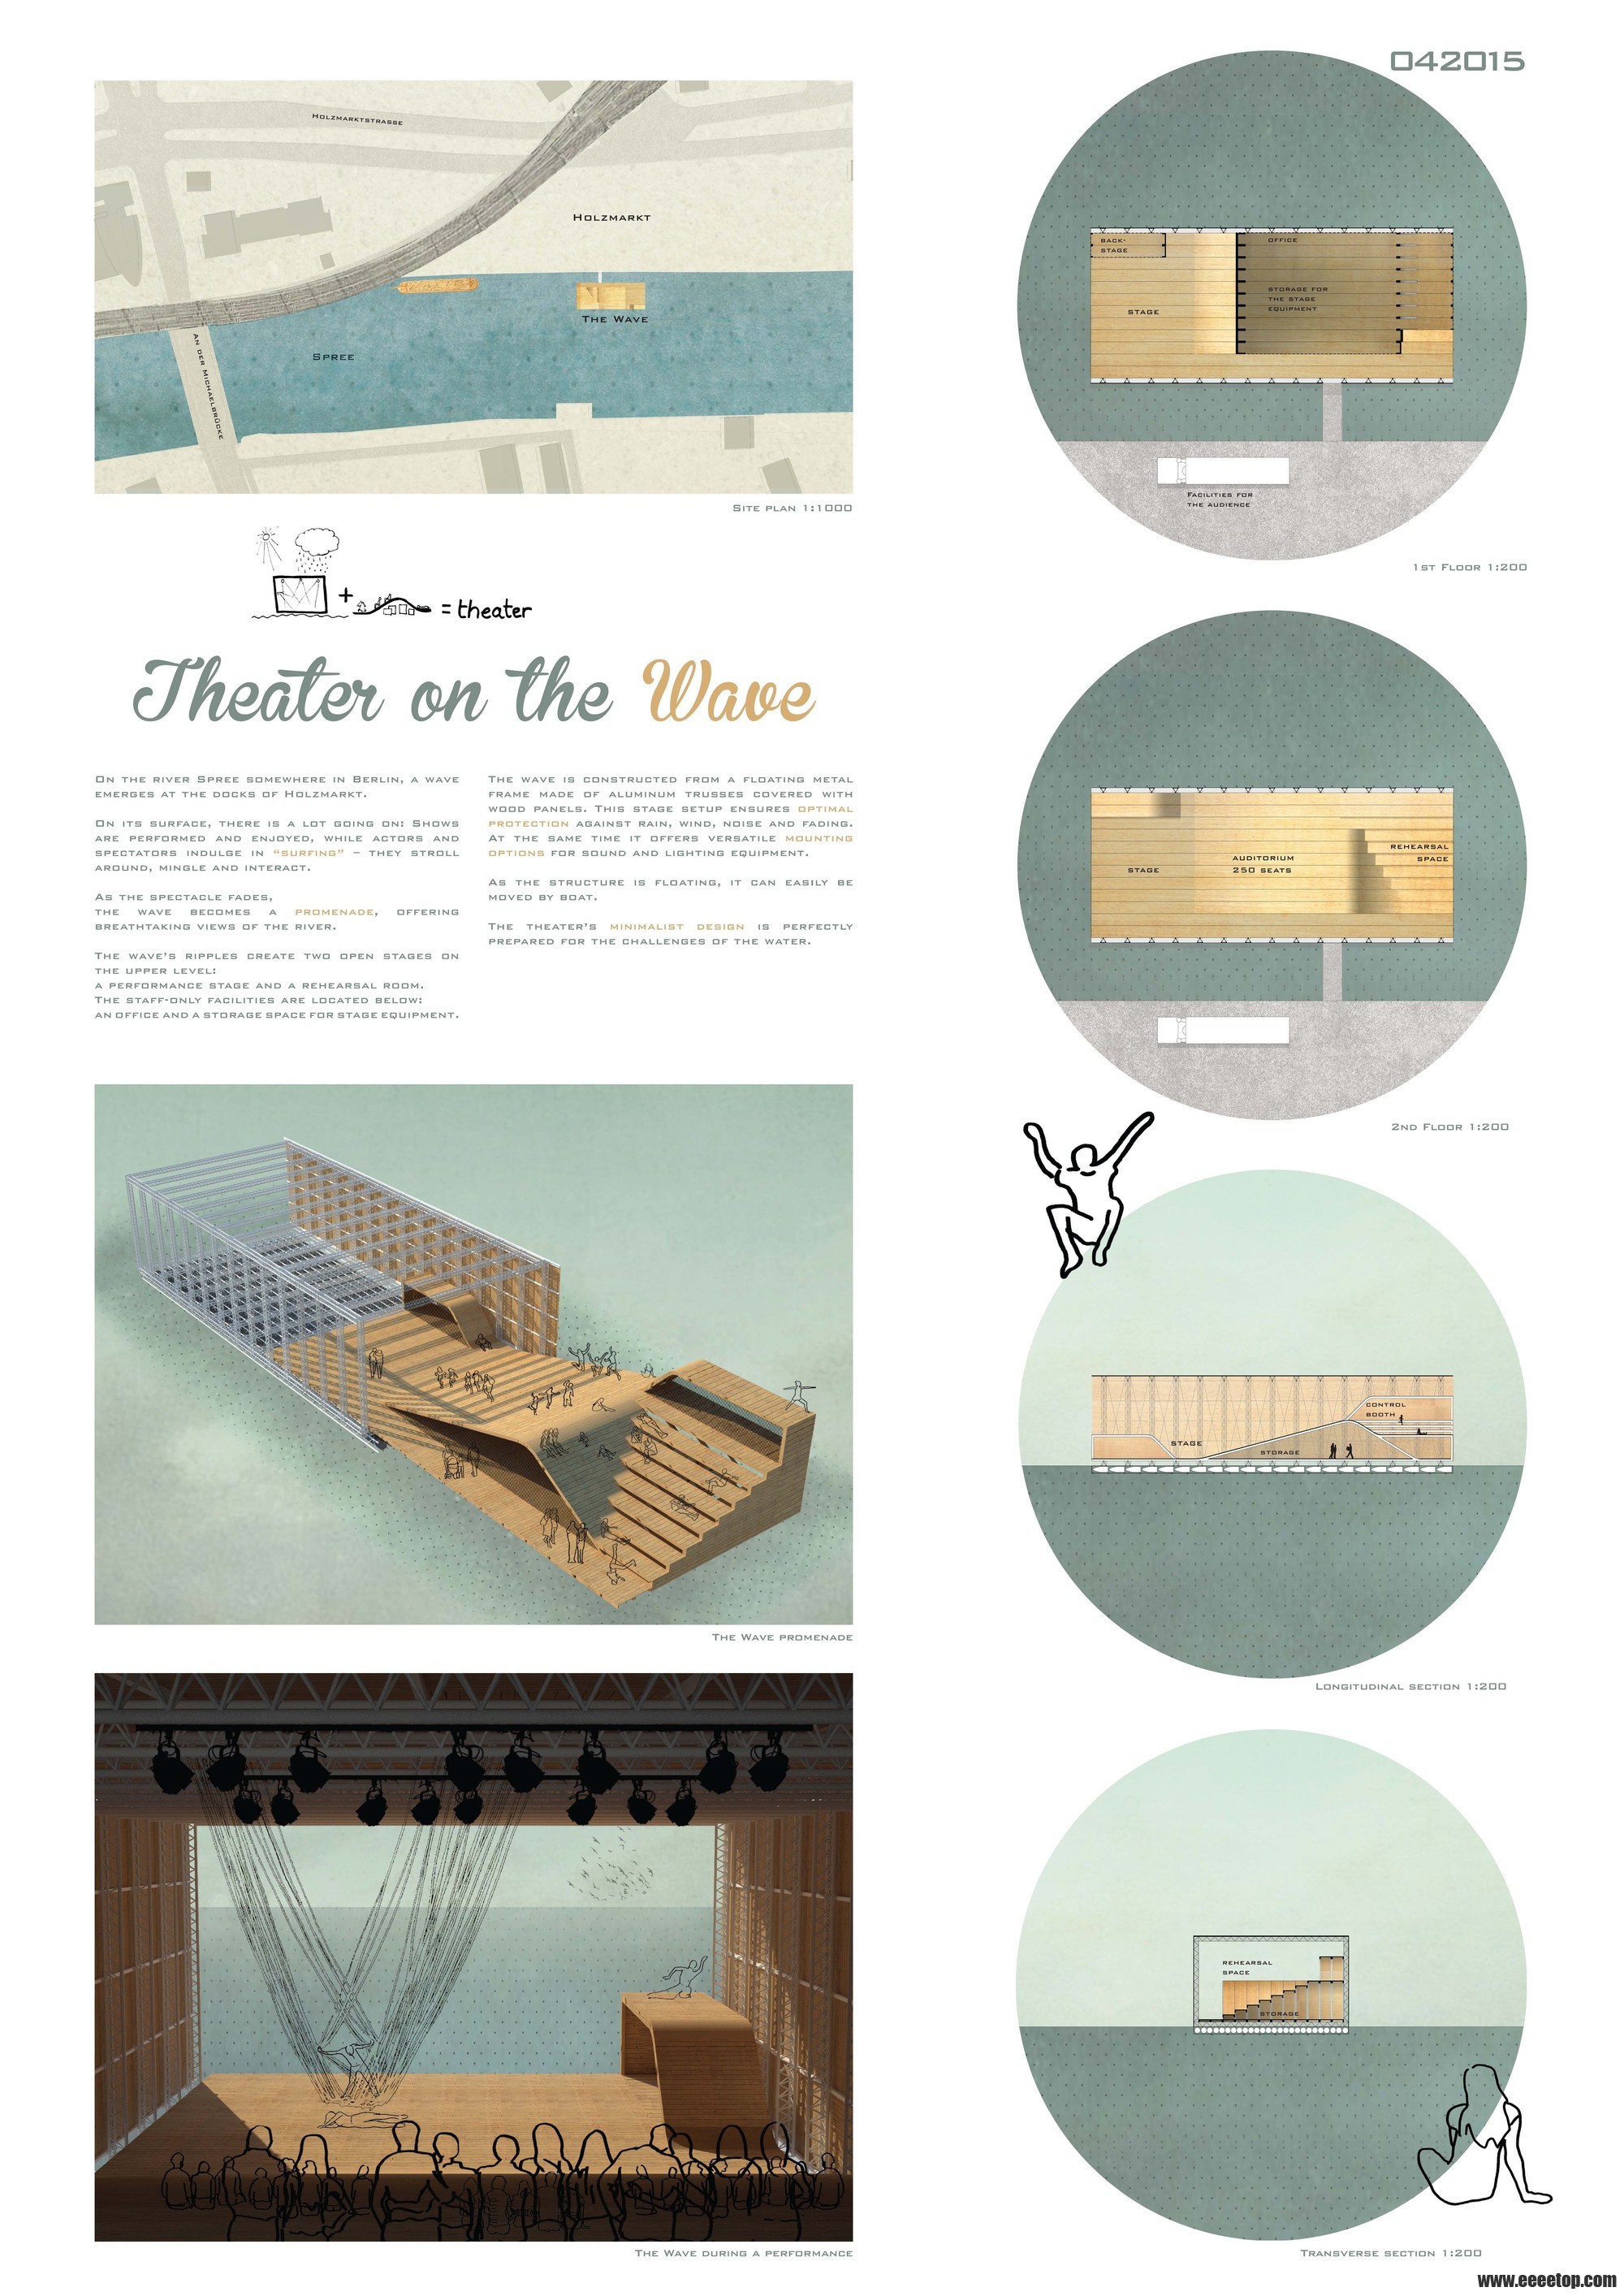 03_Additional_Prize_Theater_on_the_Wave.jpg